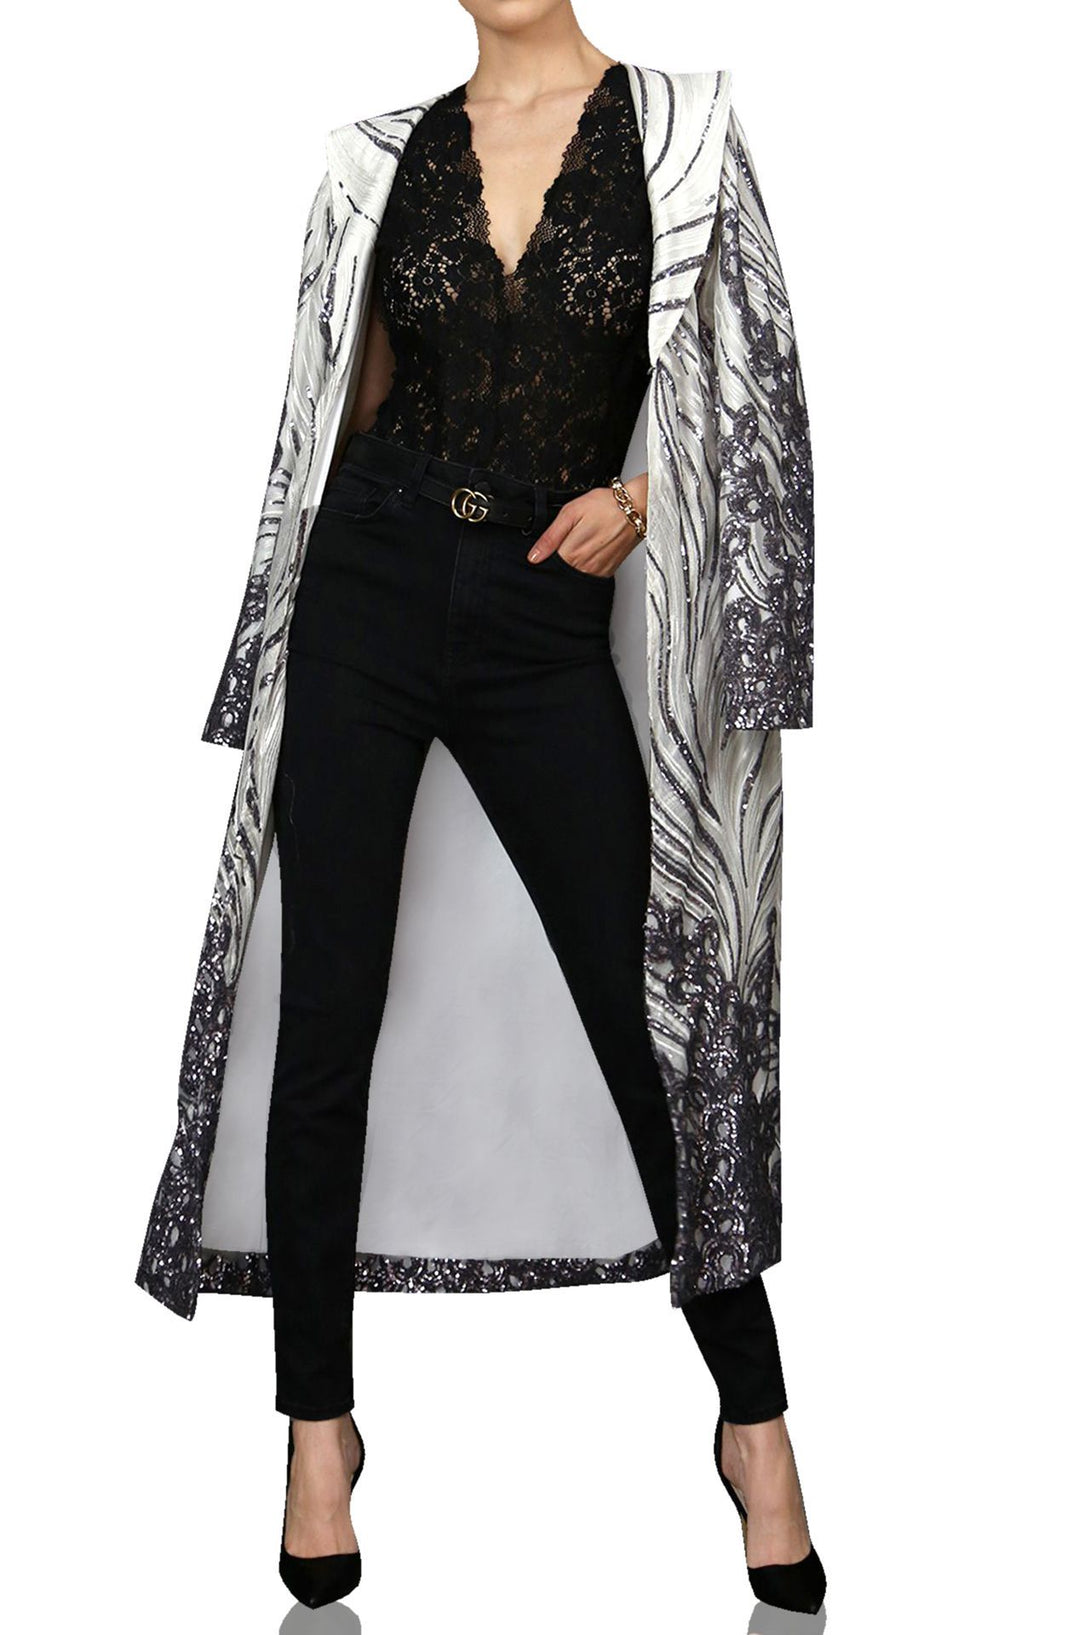 Sequin-Long-Duster-Jacket-By-Kyle-Richard